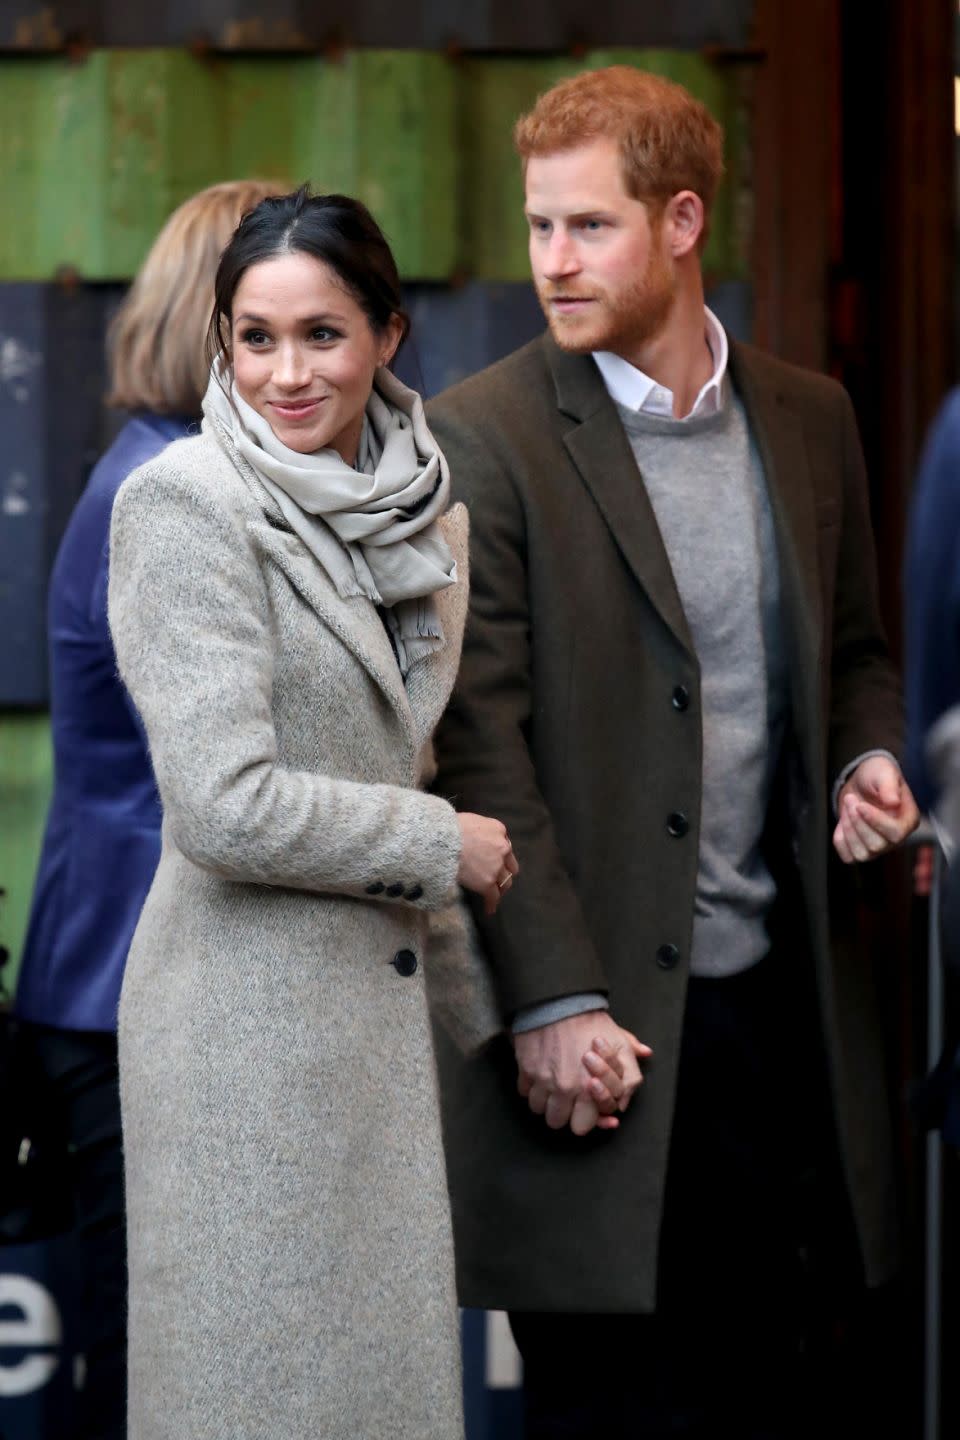 Prince Harry and Meghan Markle are due to marry on May 19. Photo: Getty Images